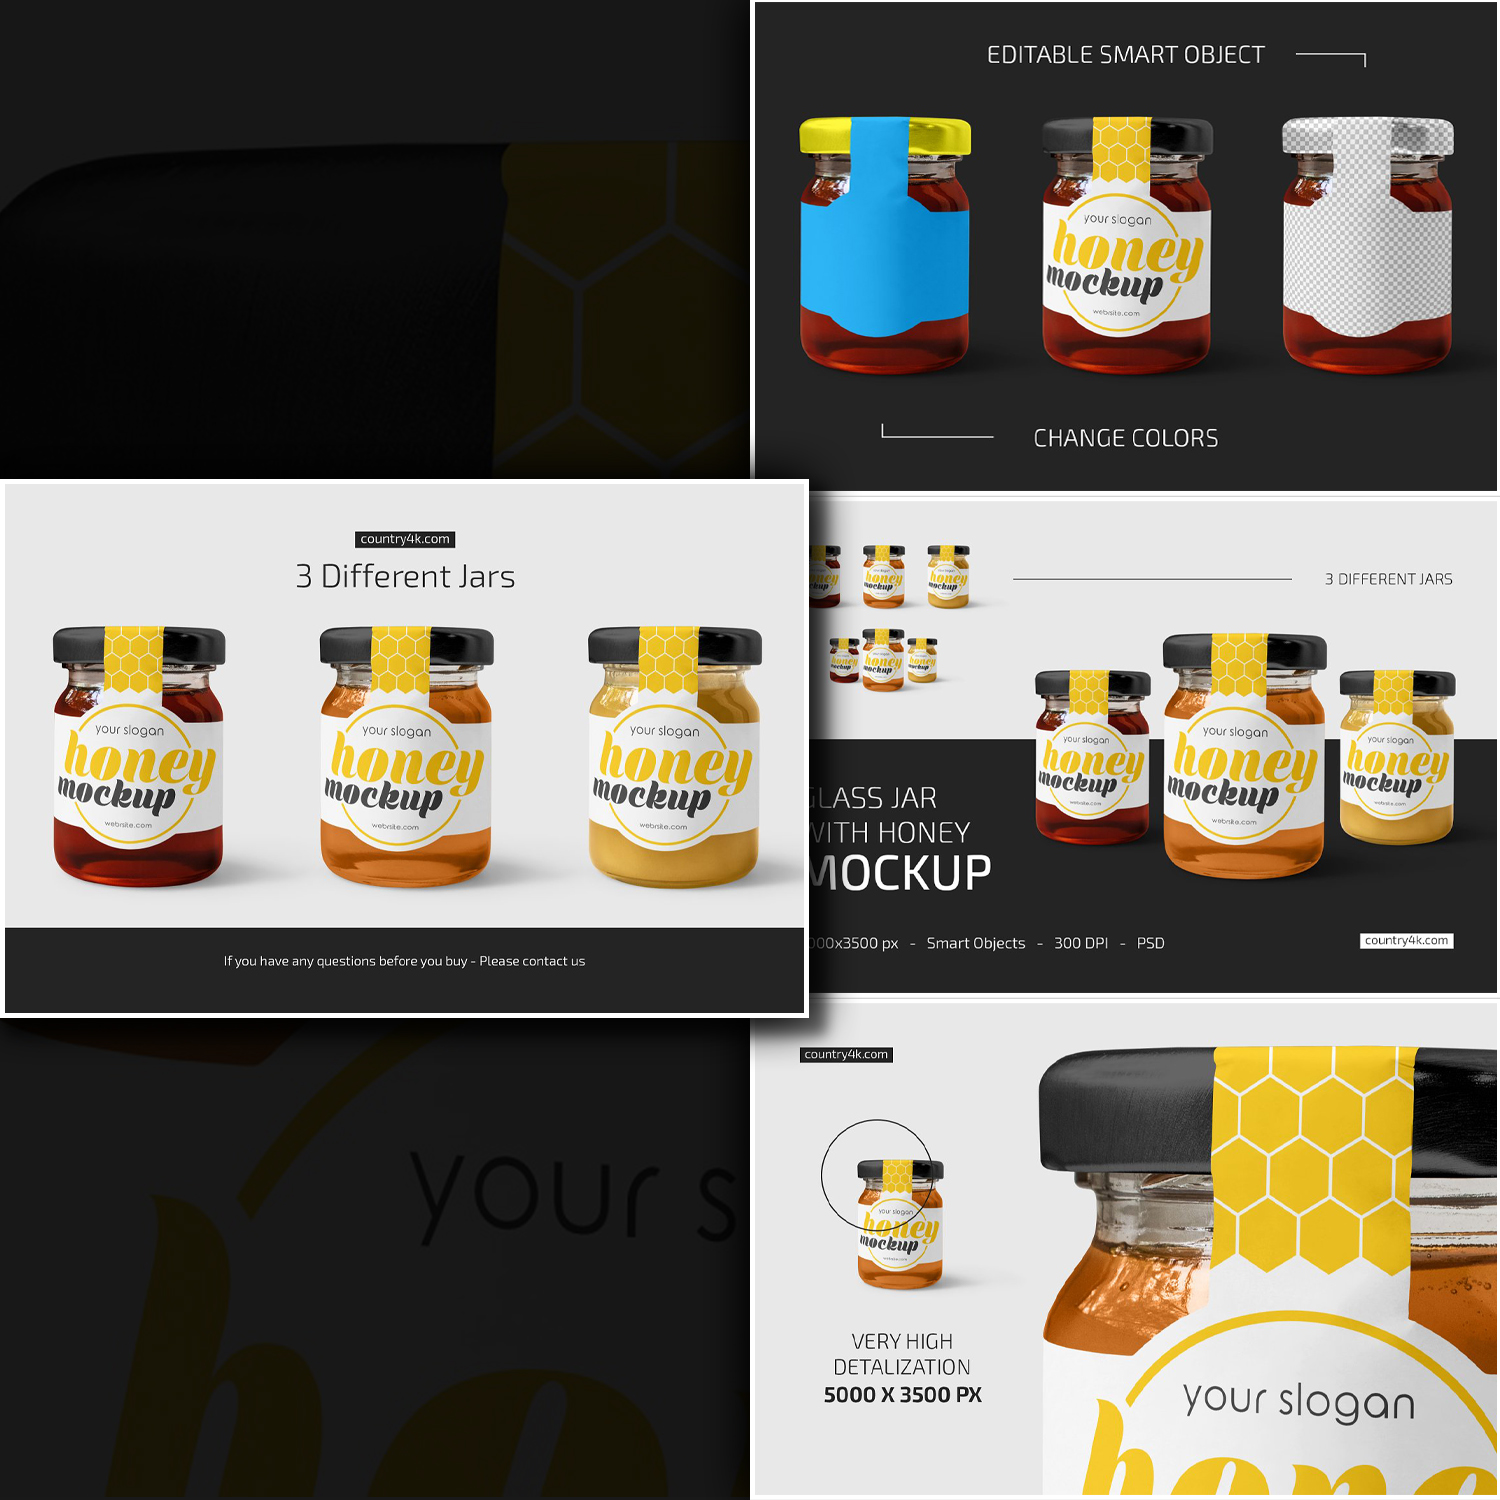 Preview glass jar with honey mockup set.